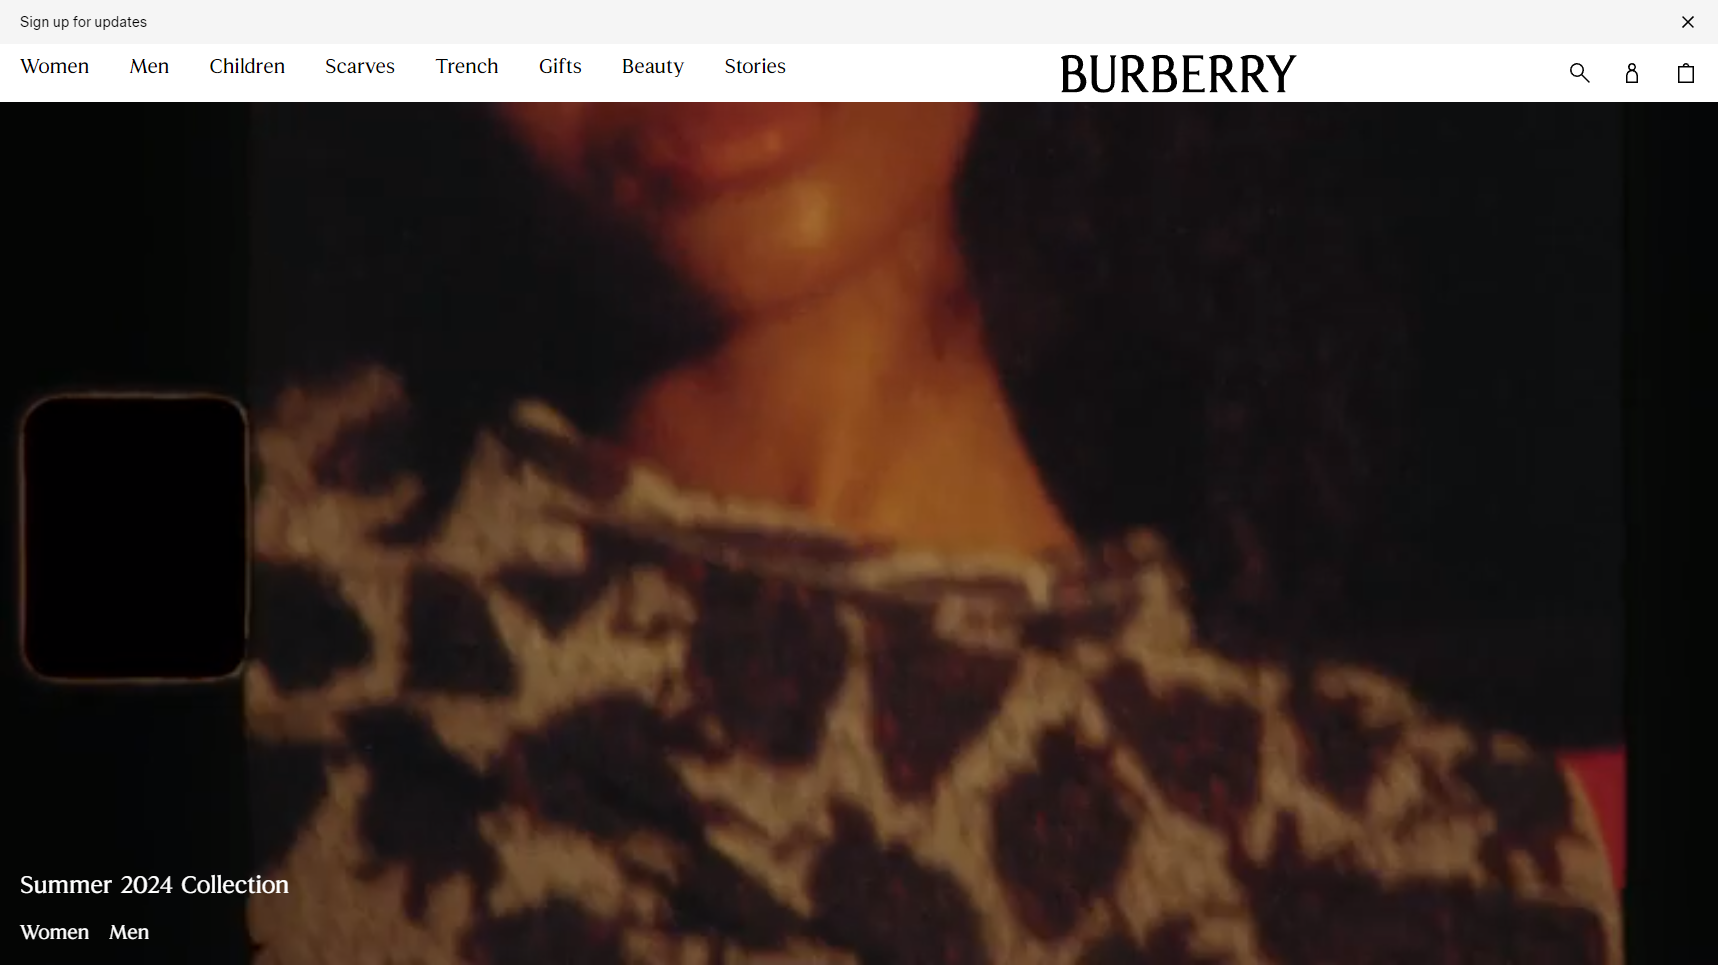 Burberry - Leather Product Manufacturer